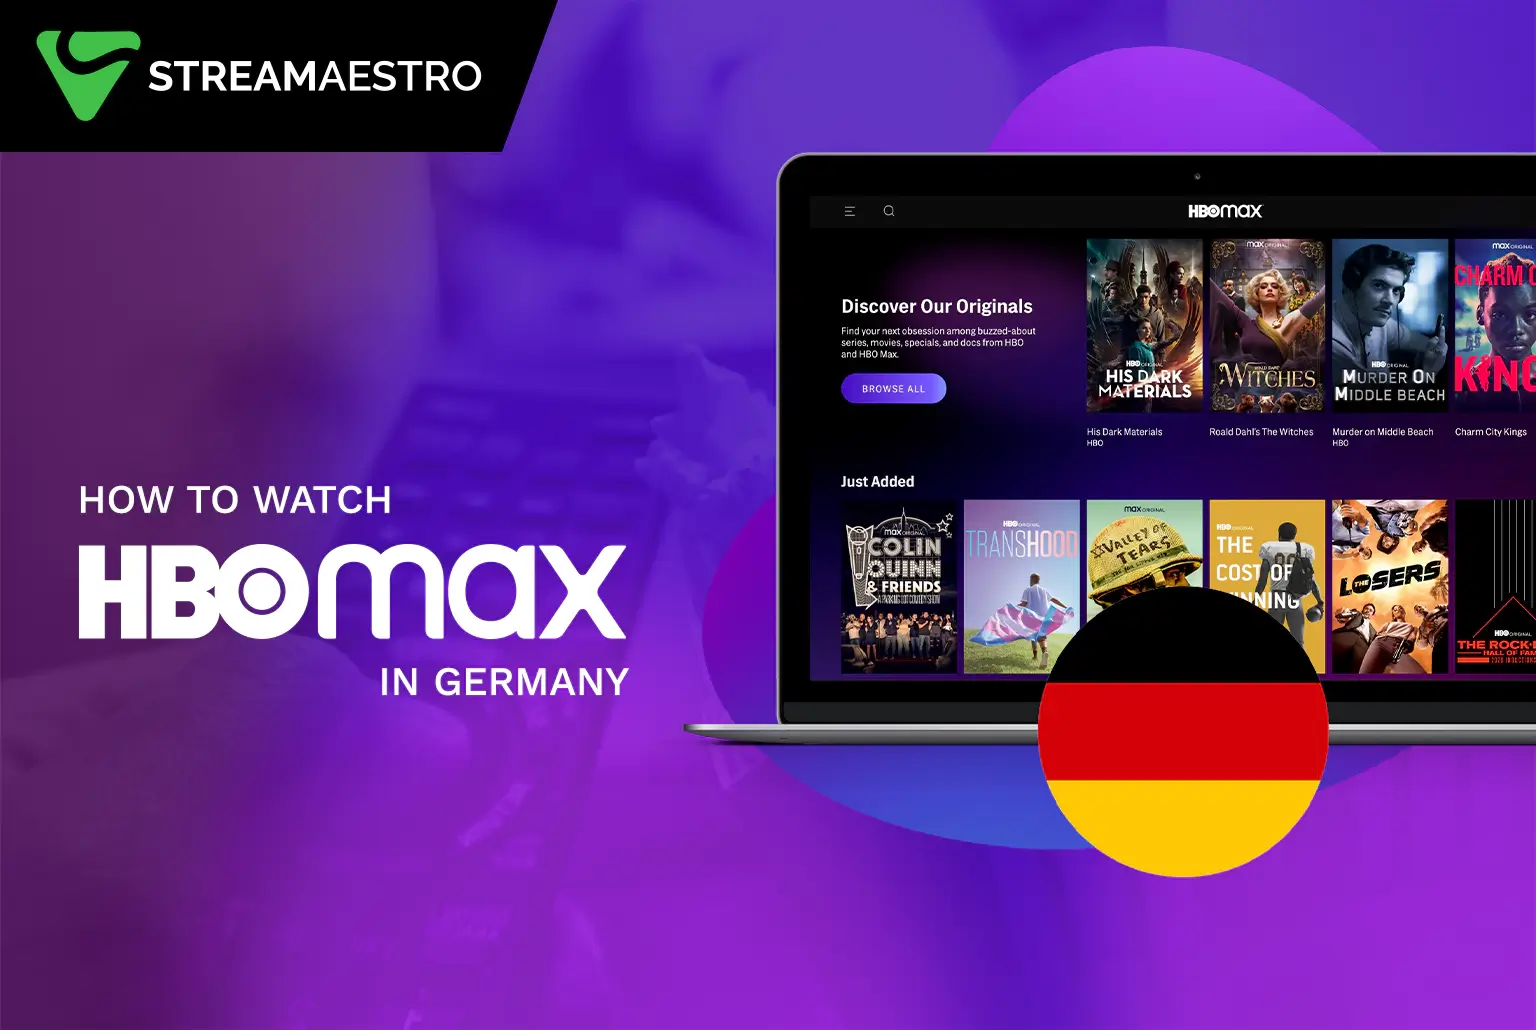 Watch HBO Max in Germany